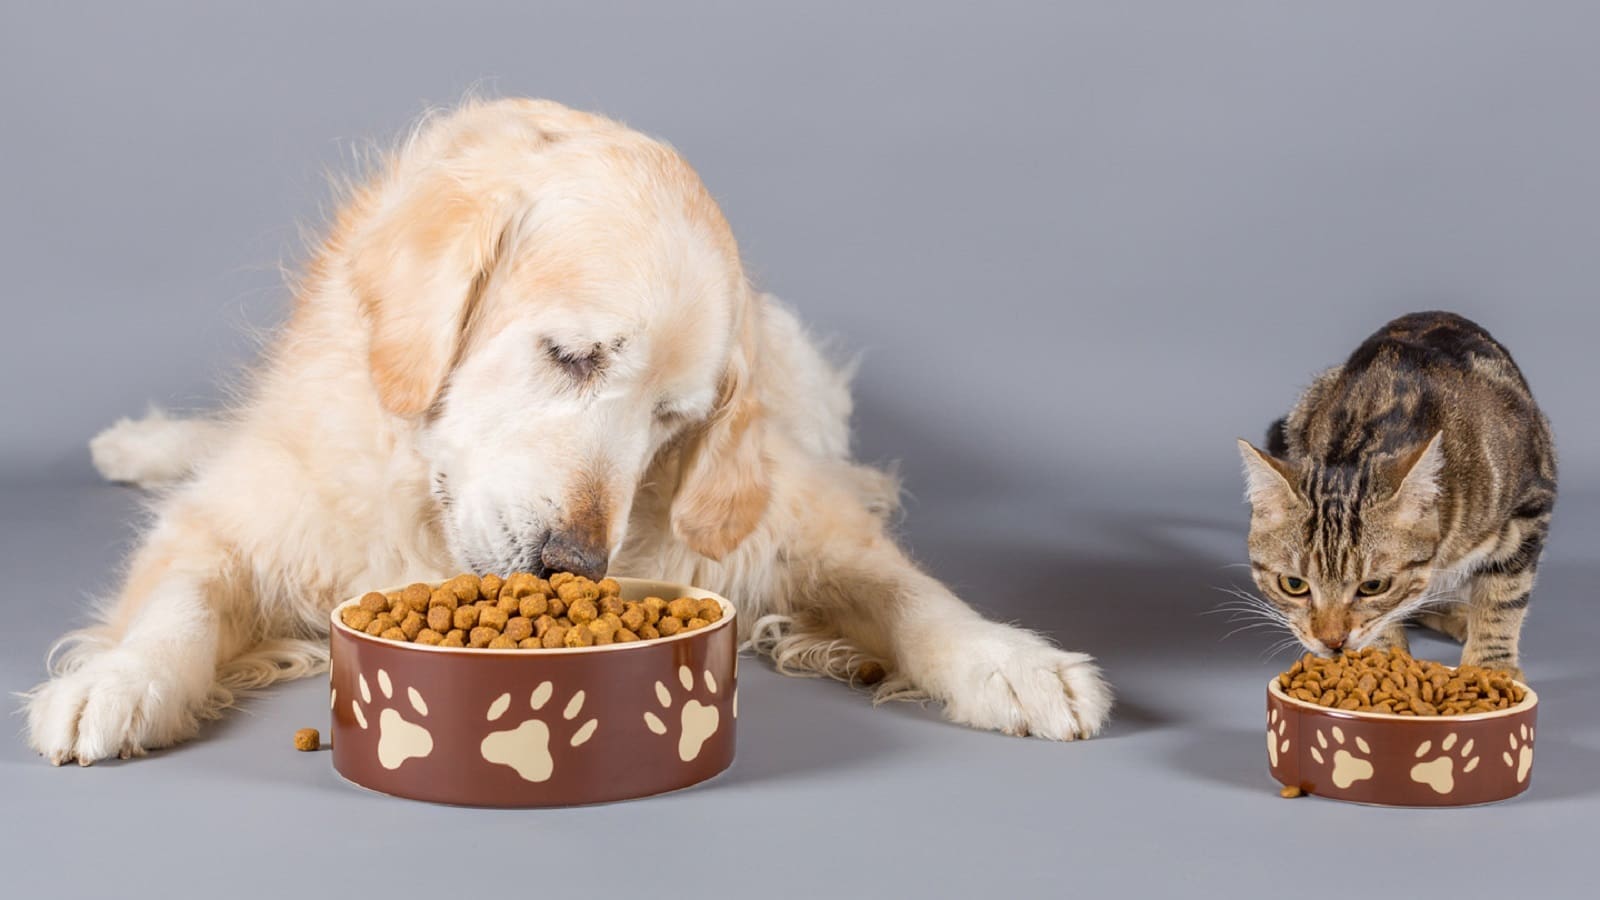 American Pet Products Association completes acquisition of The Pet Summit